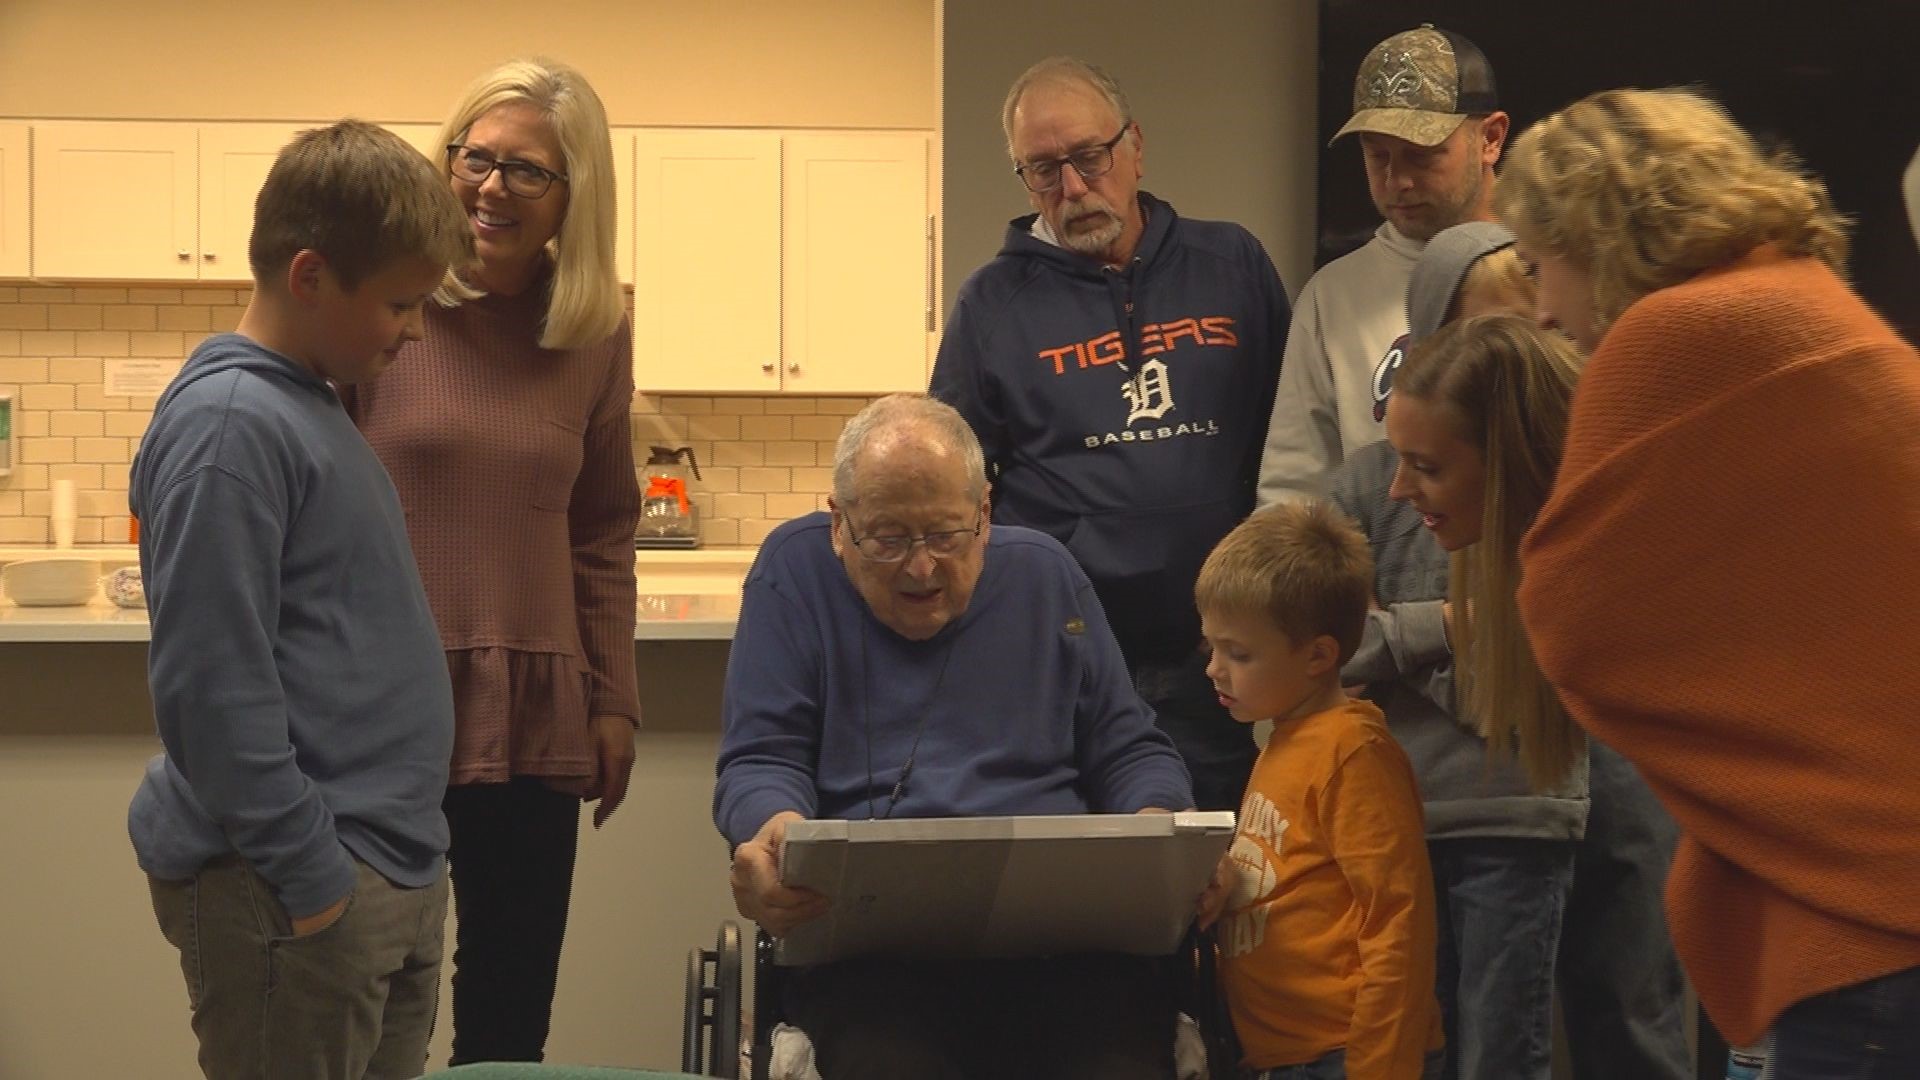 A program paying tribute to veterans in hospice led to a heartwarming ceremony where a 91-year-old was thanked by family and organizers alike.